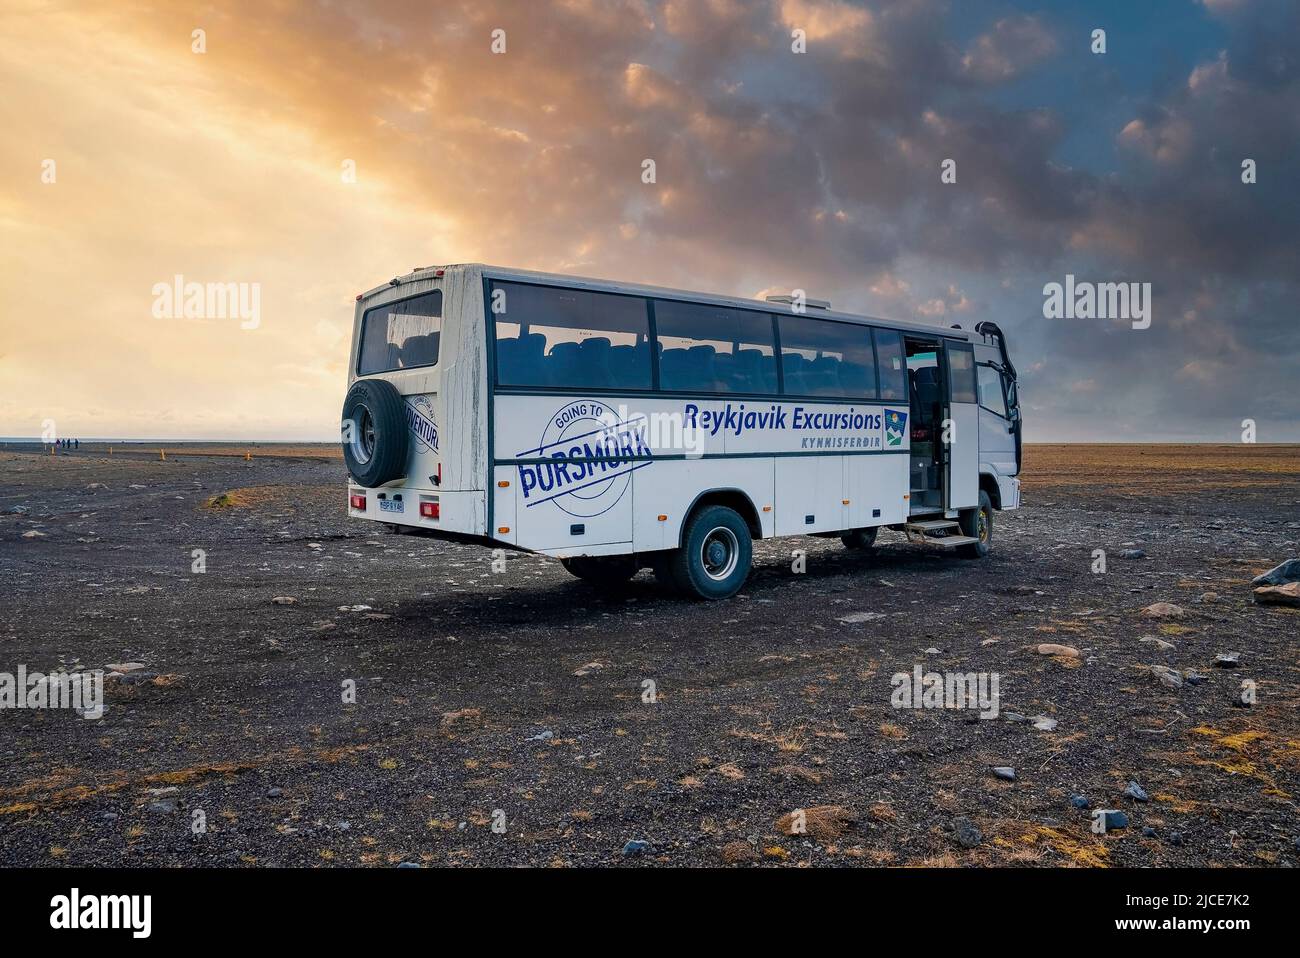 Reykjavik Excursions flybus parked on lava sand against cloudy sky during sunset Stock Photo